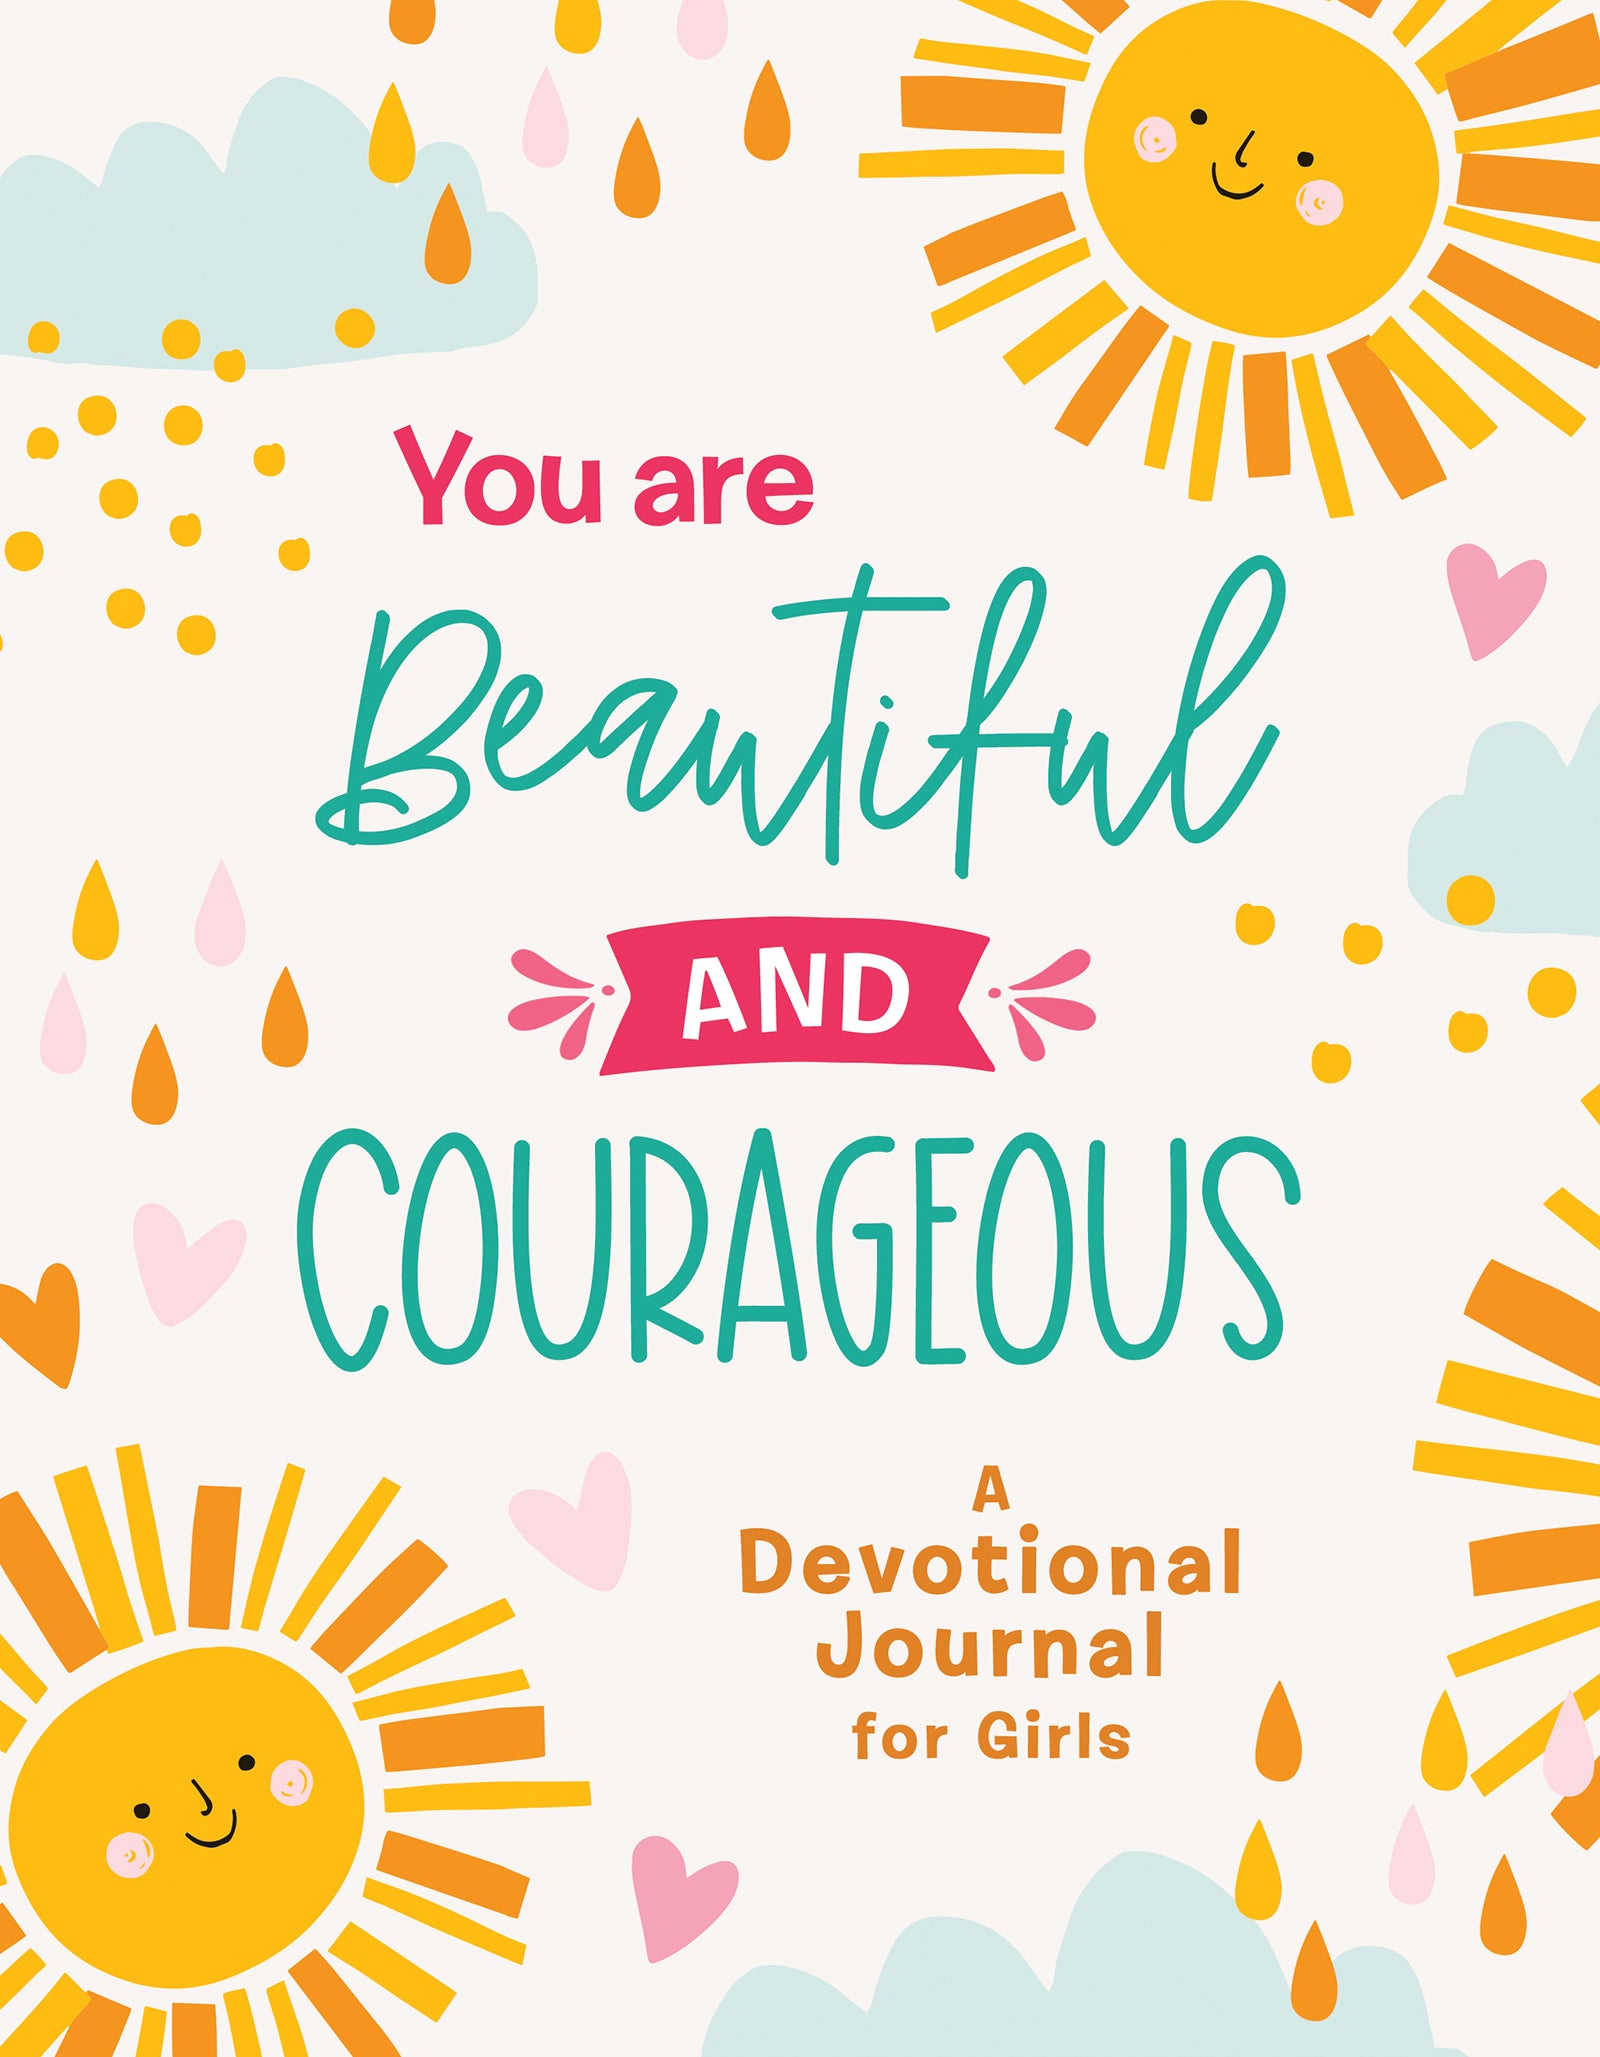 You Are Beautiful and Courageous - The Christian Gift Company